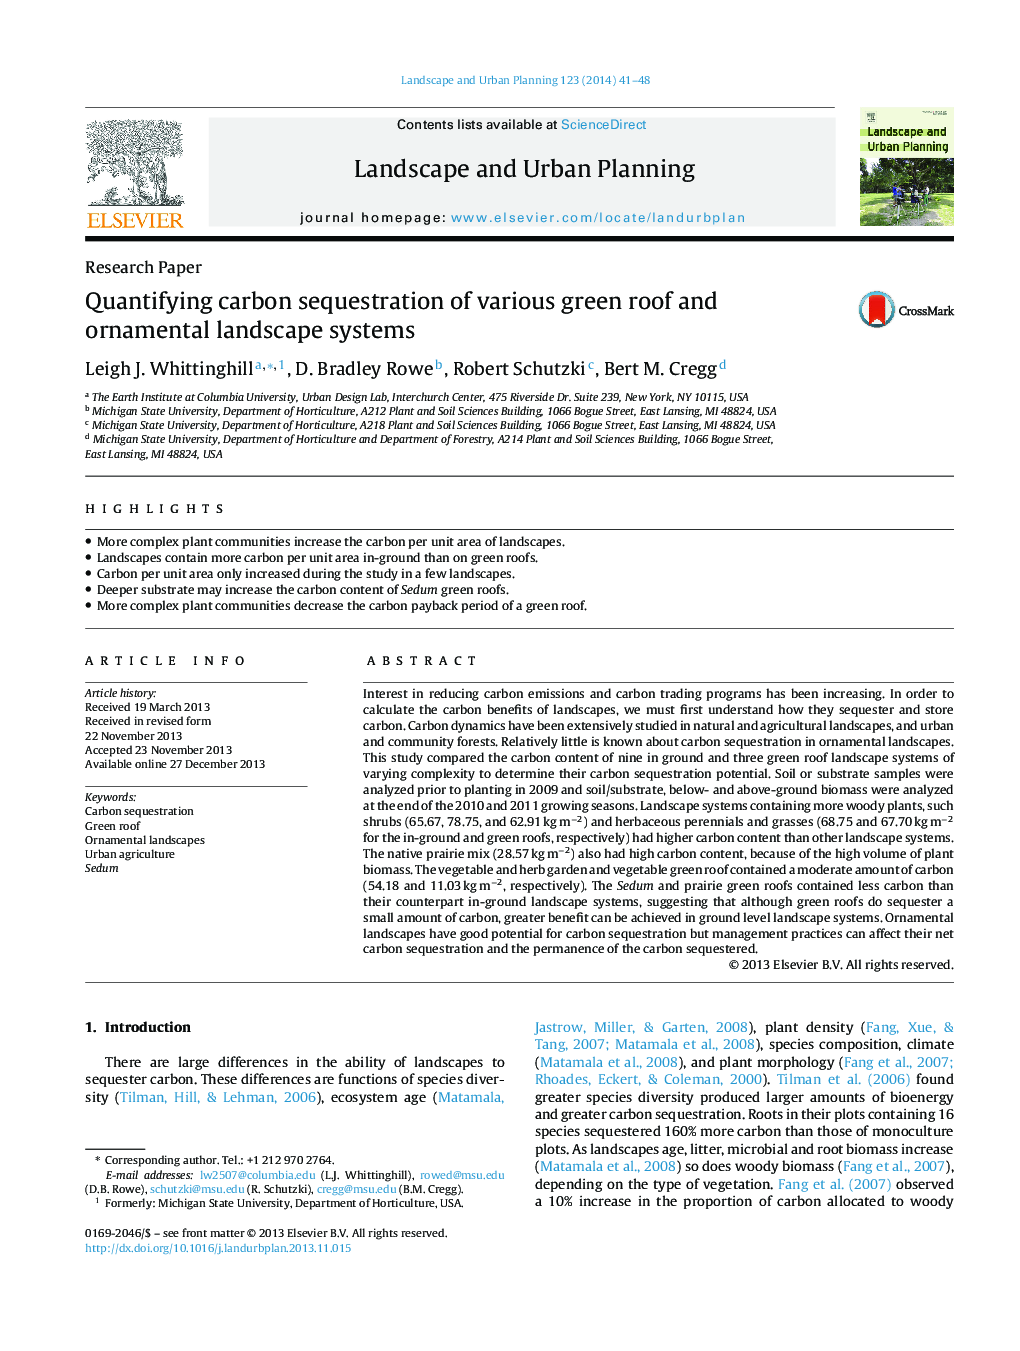 Quantifying carbon sequestration of various green roof and ornamental landscape systems